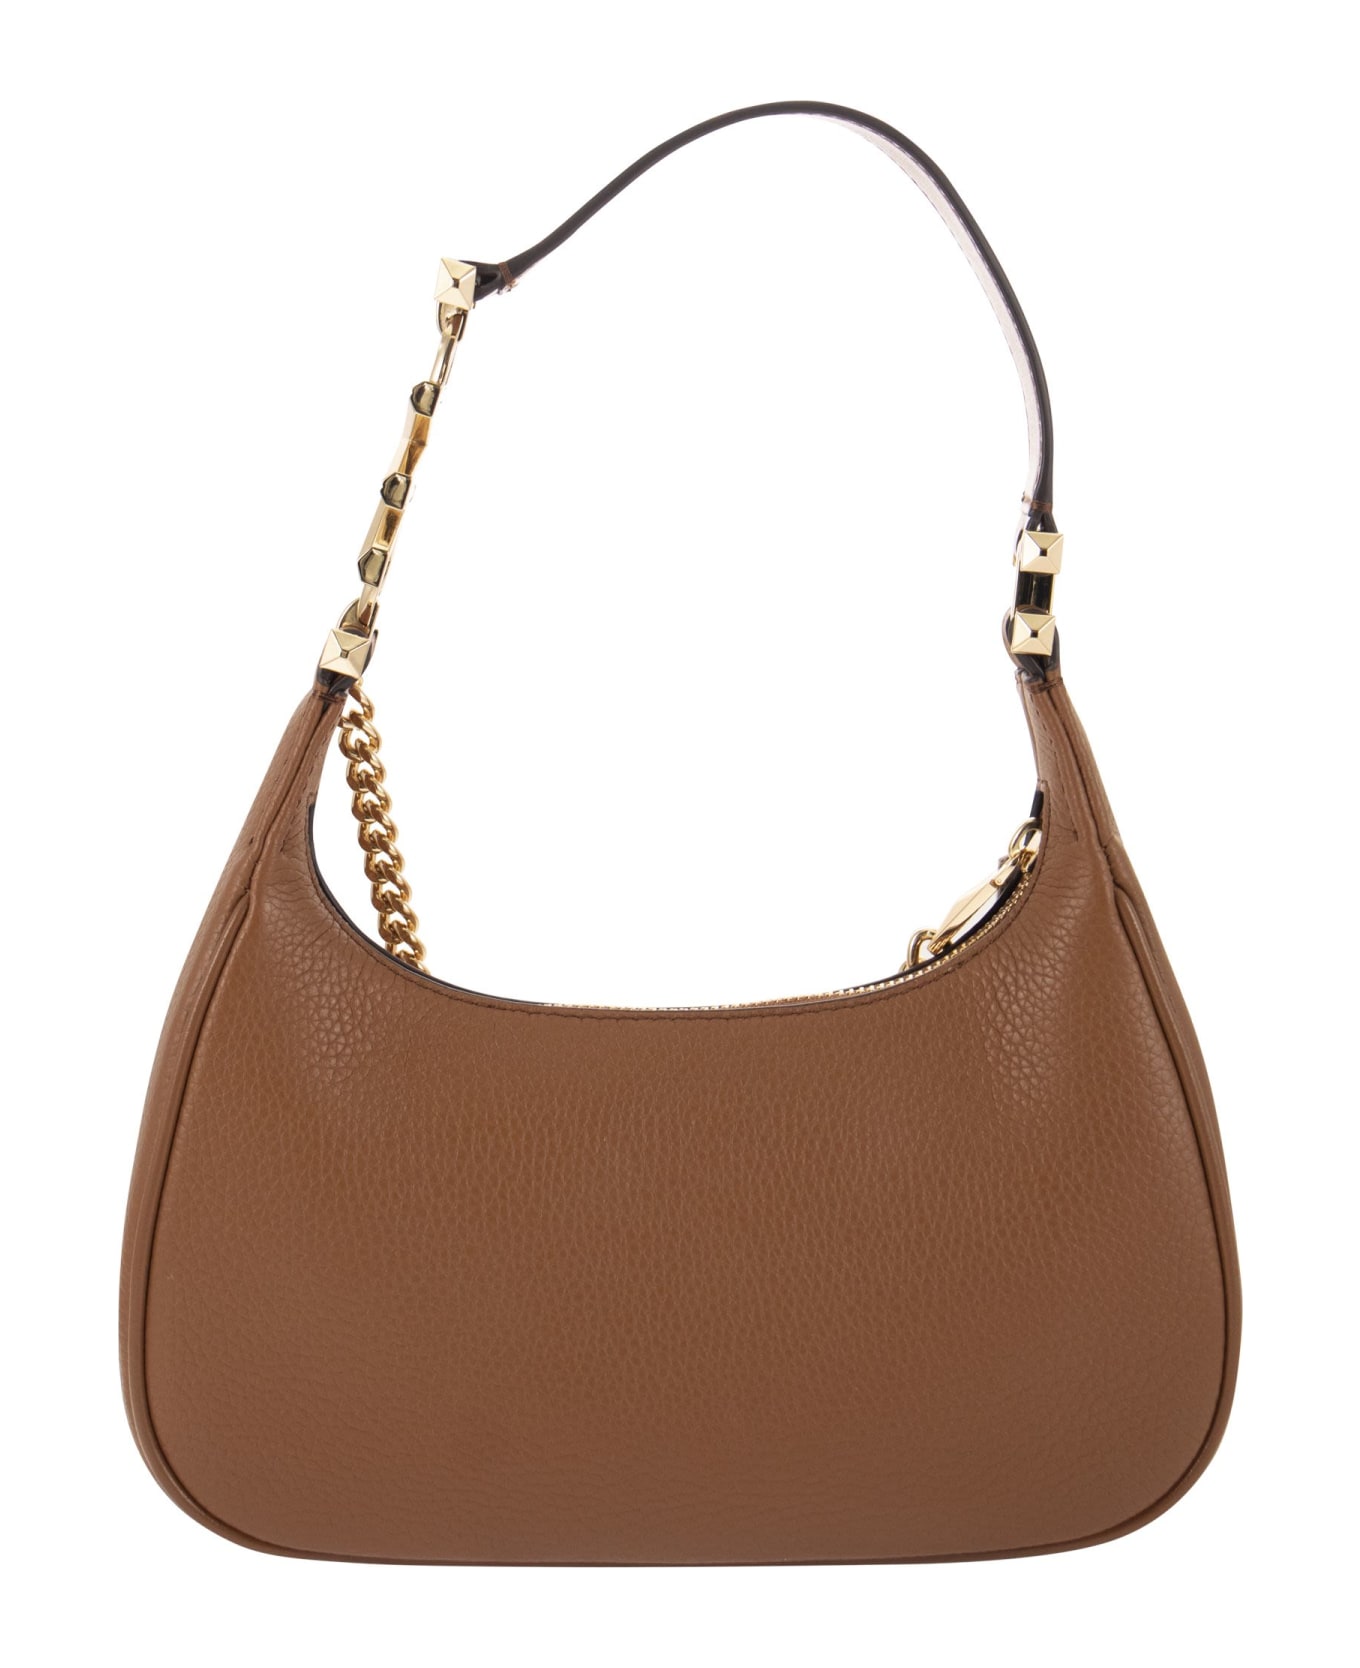 Michael Kors Piper Bag In Brown Leather - Leather トートバッグ